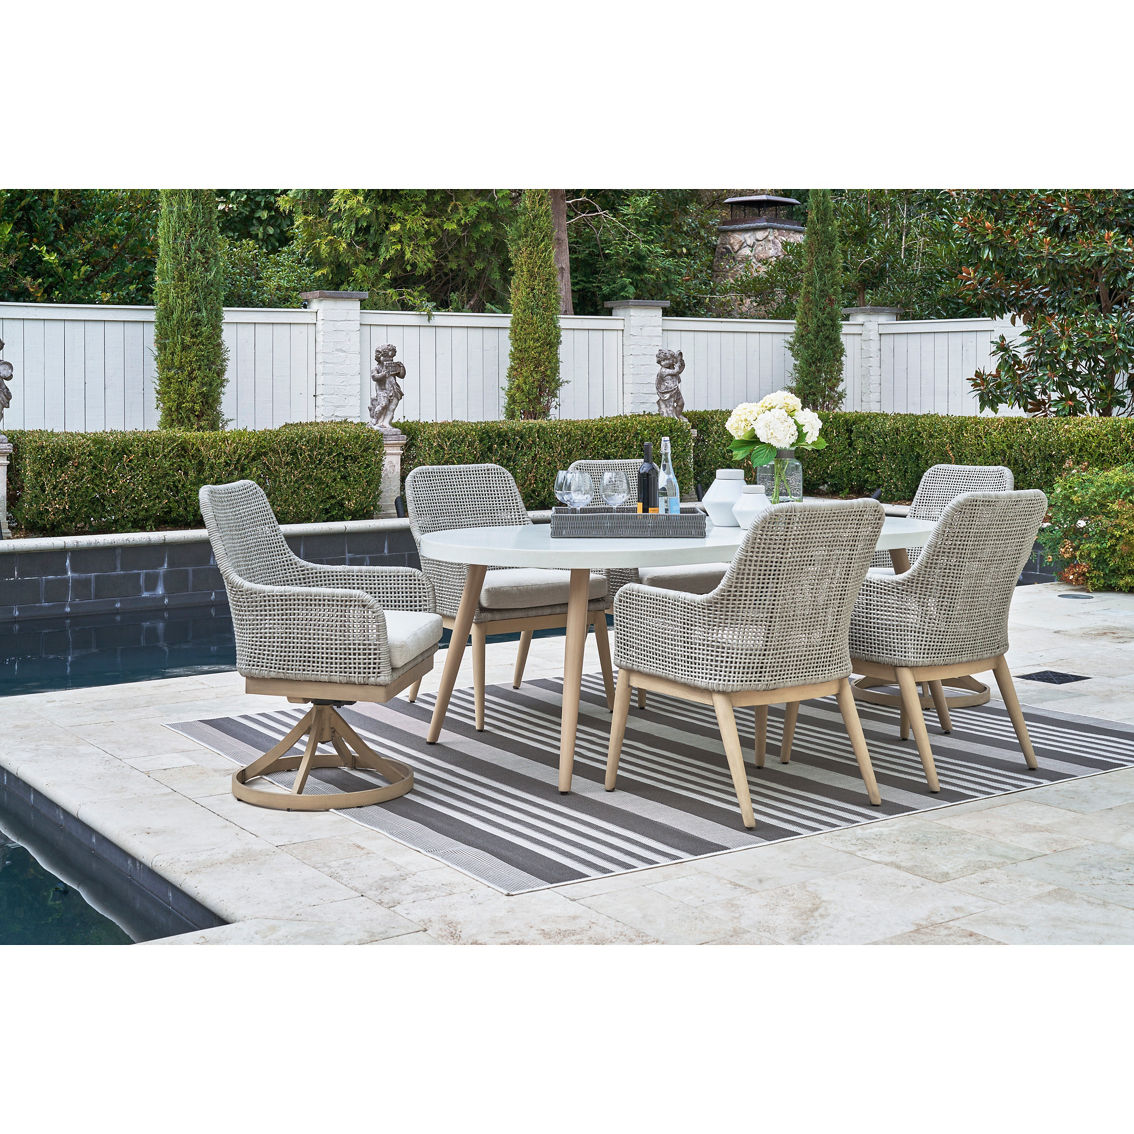 Signature Design by Ashley Seton Creek Outdoor Dining Table - Image 5 of 6